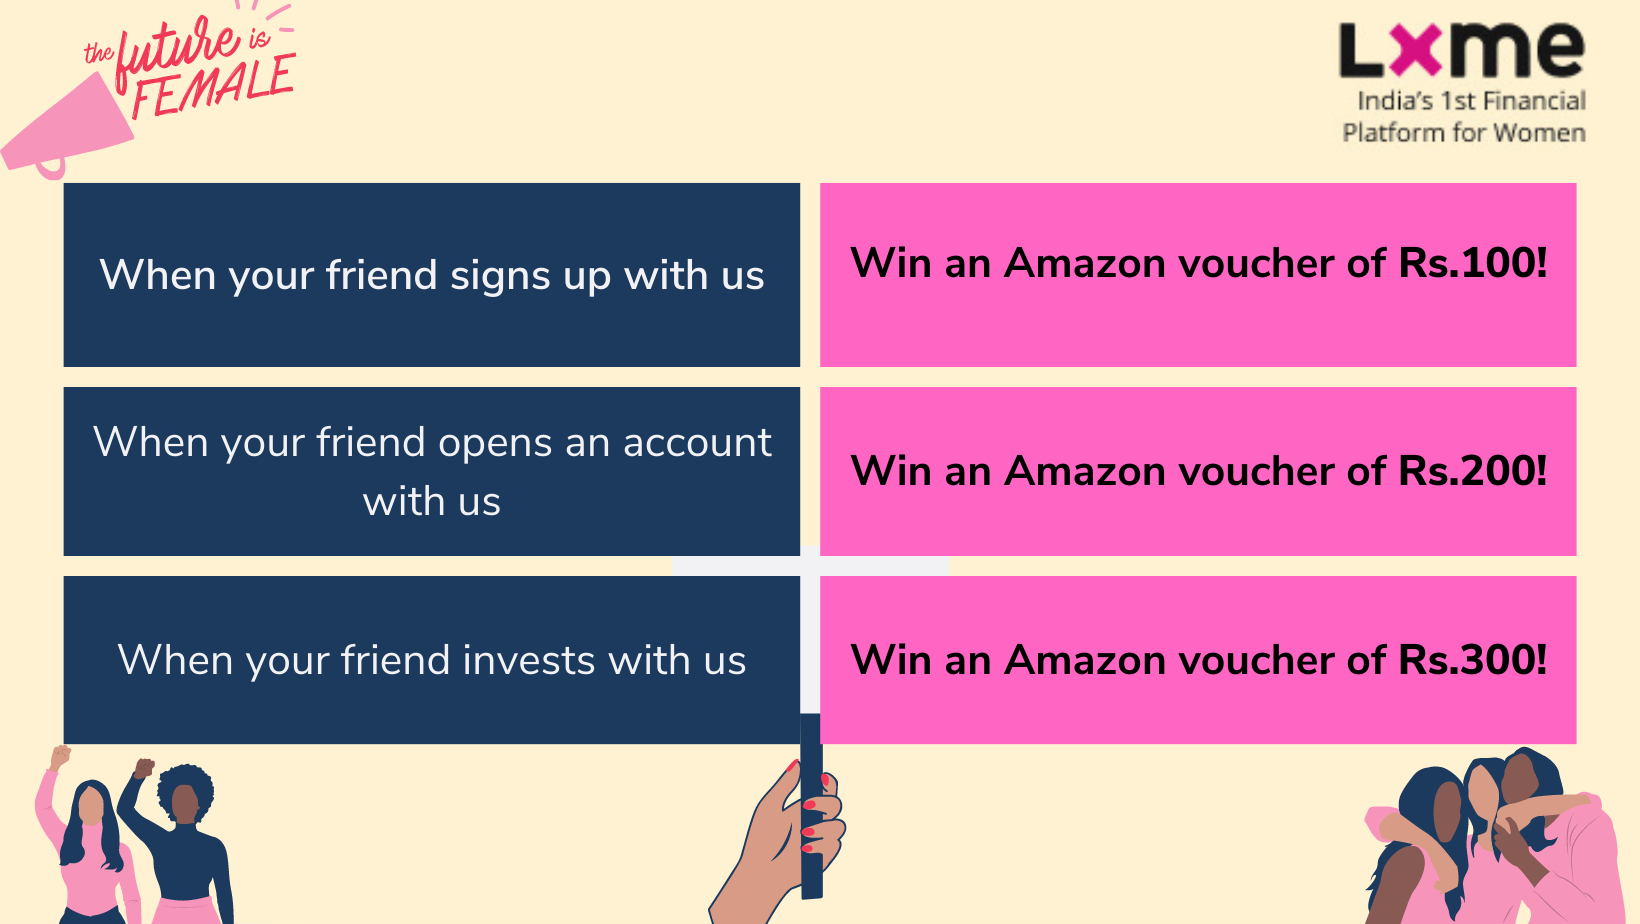 Referral, refer and win, win rewards, refer your friends and earn